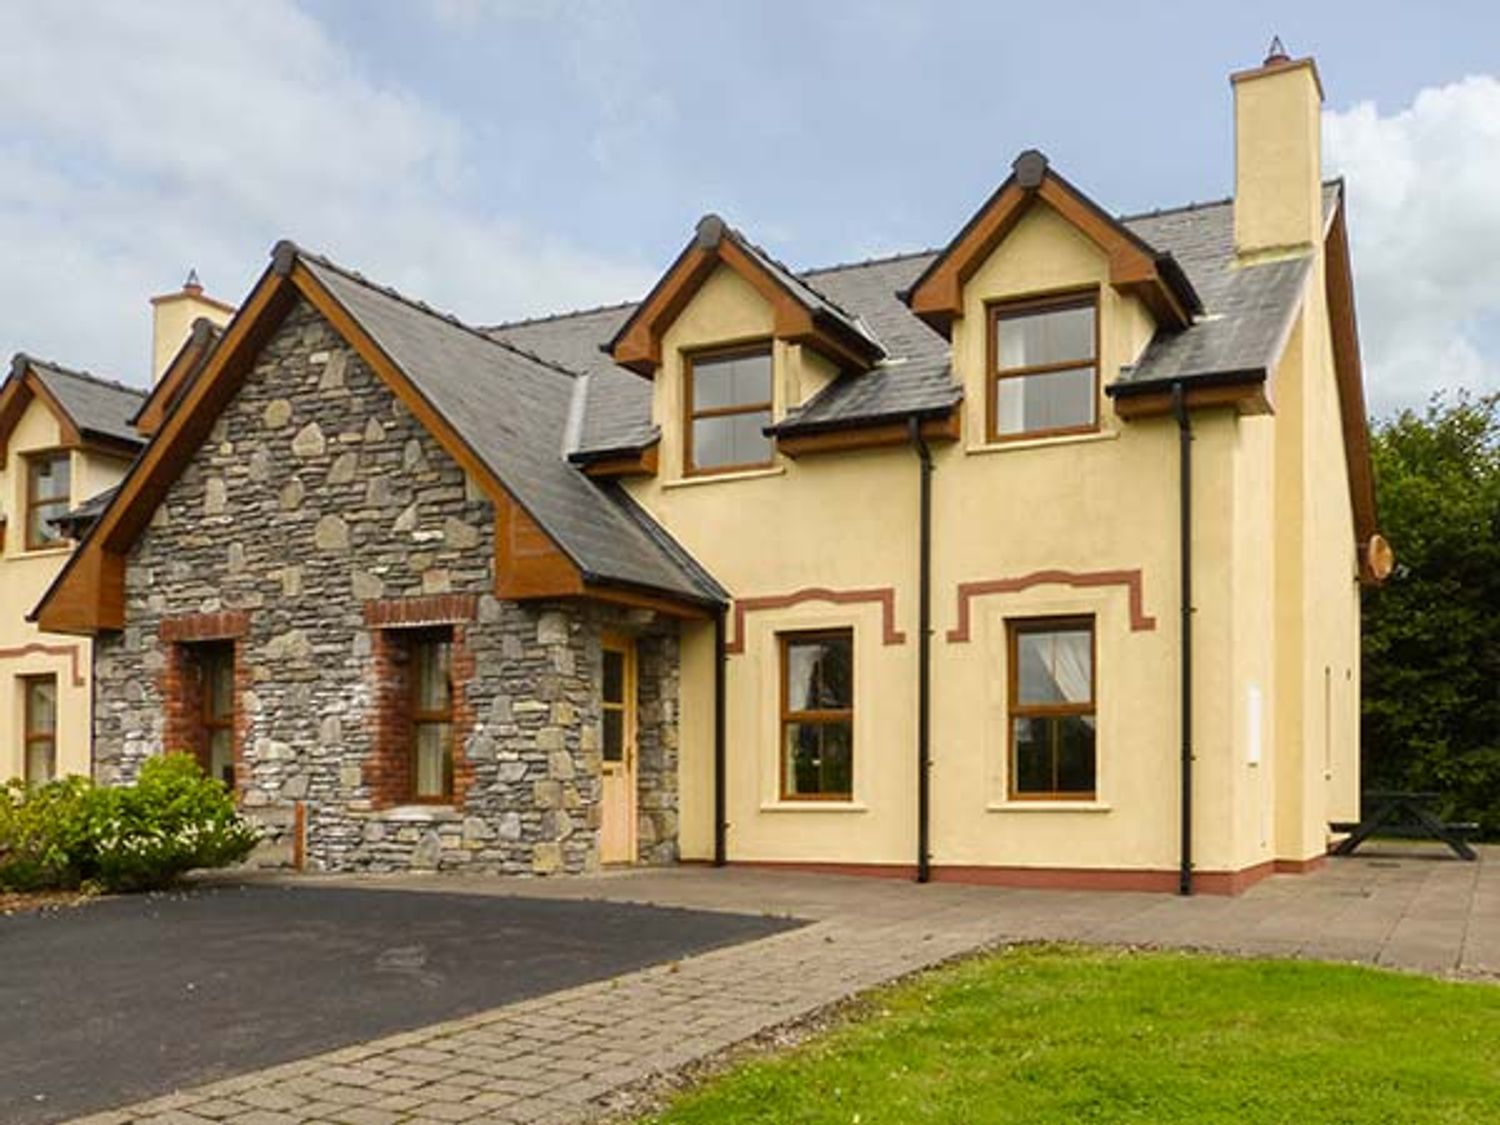 Kenmare Bay Cottage - County Kerry - 927027 - photo 1